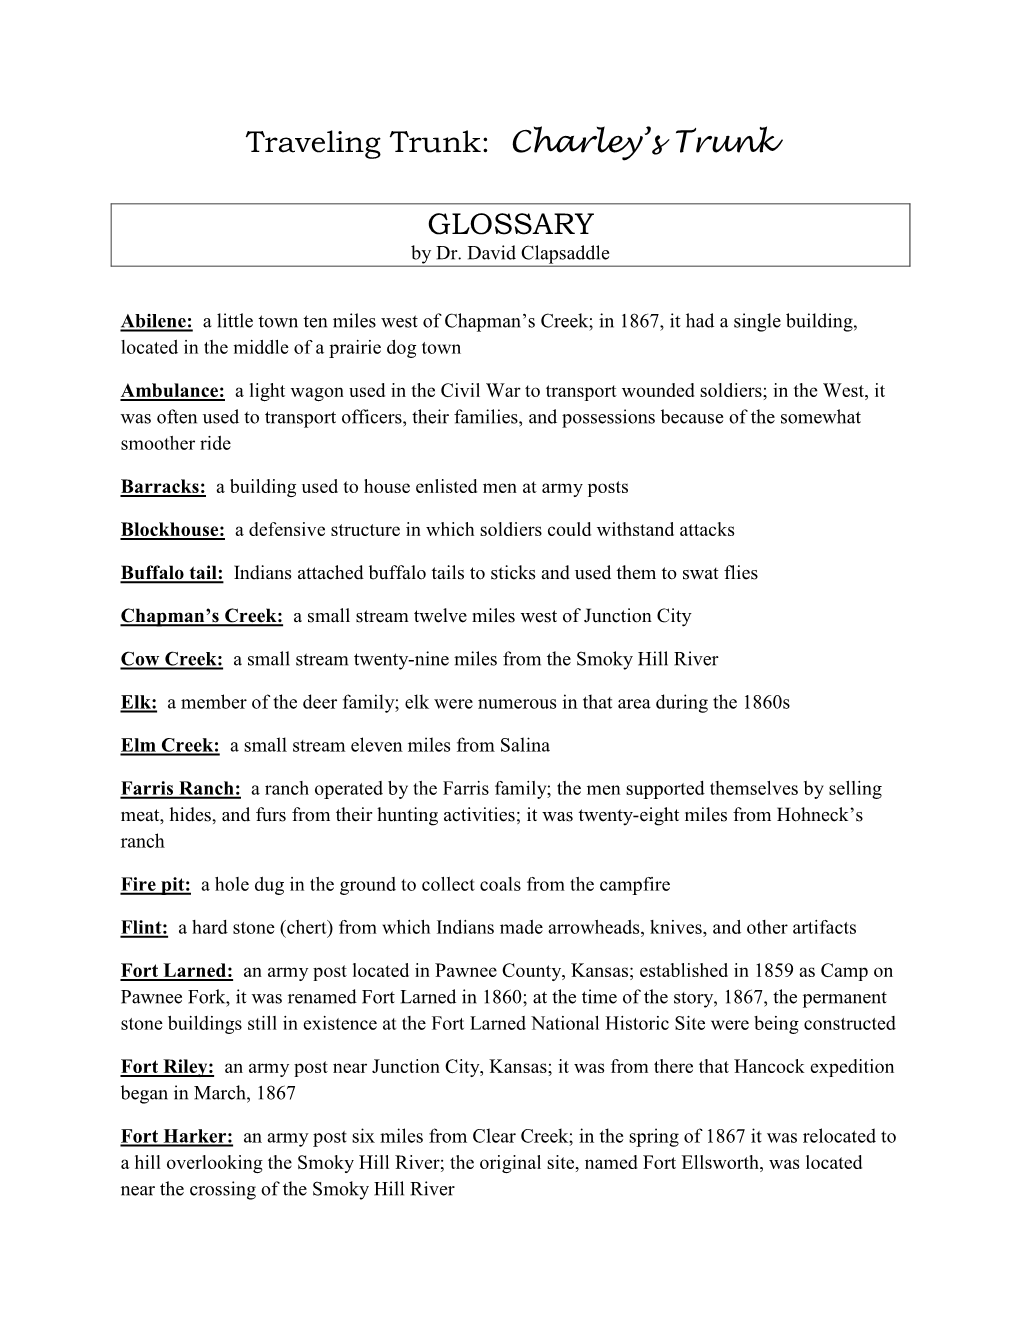 Traveling Trunk: Charley's Trunk Glossary